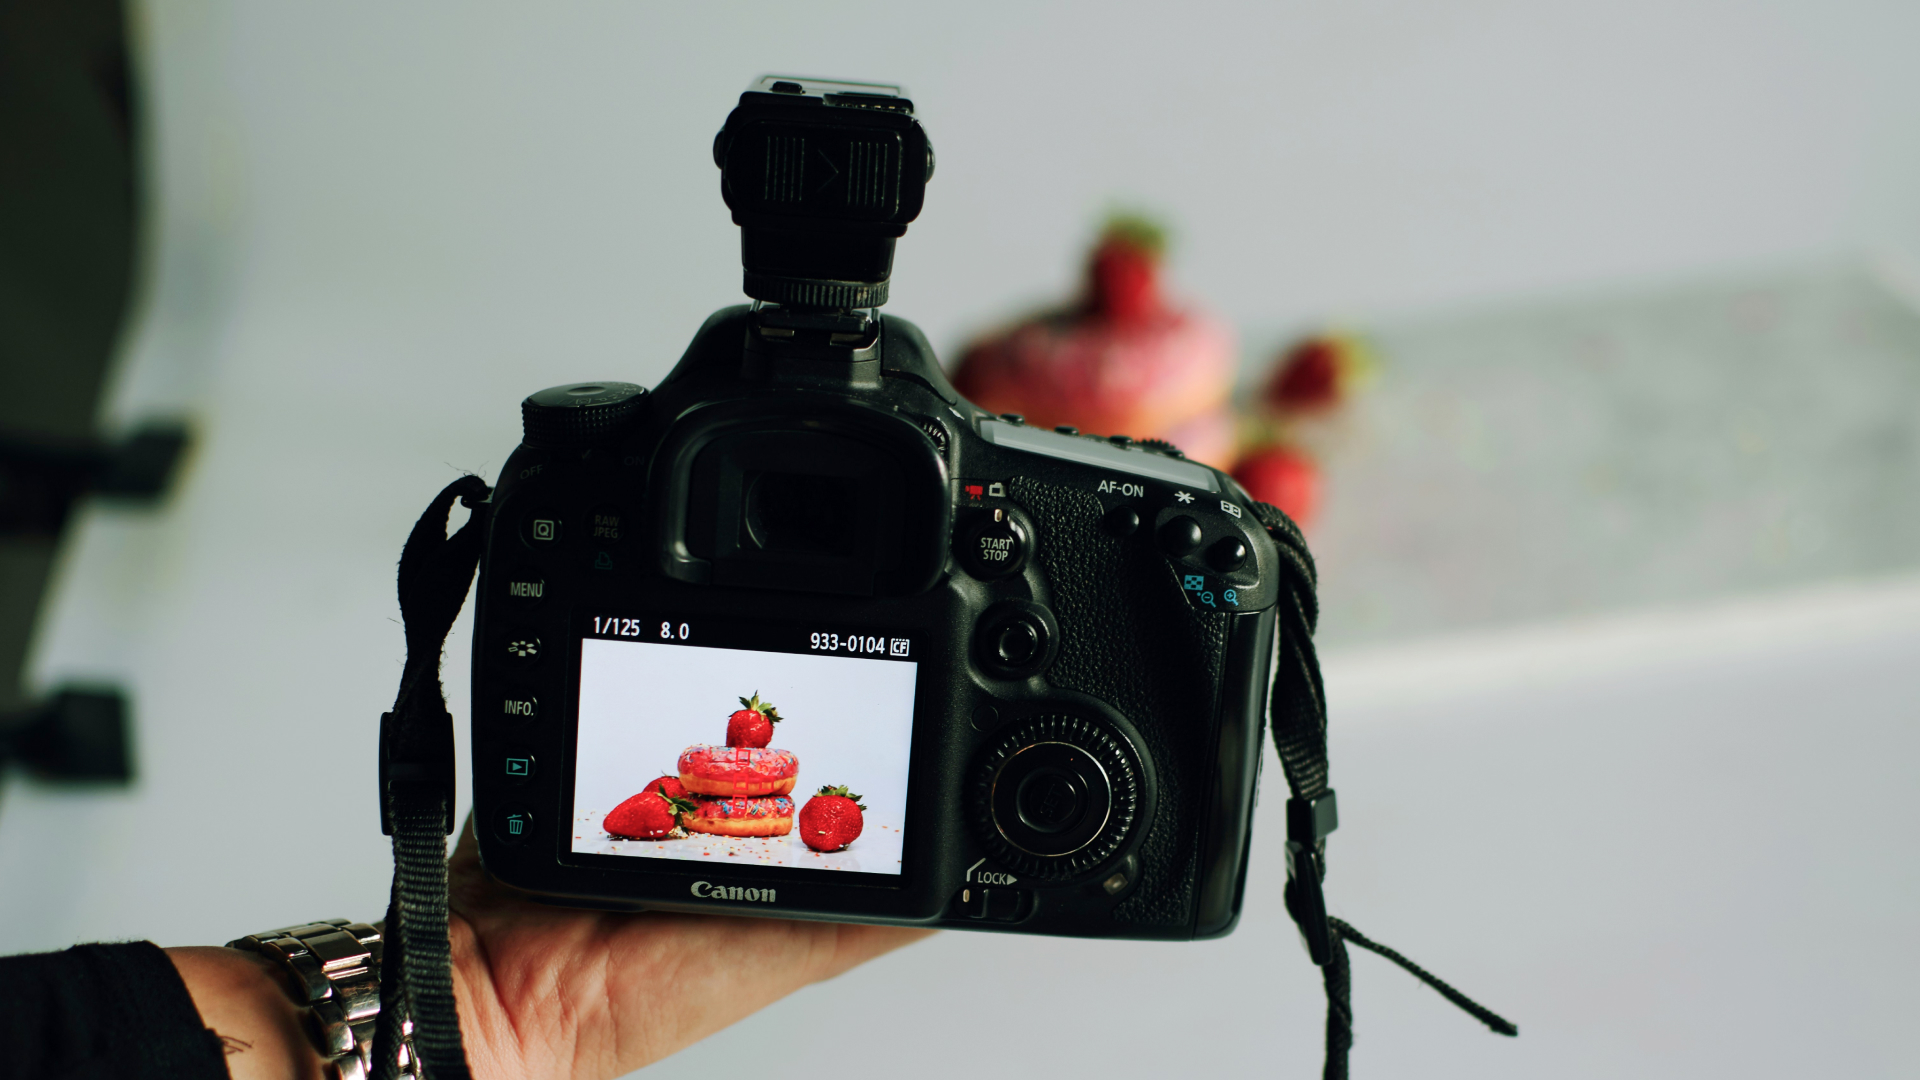 Guide to photography for small food businesses